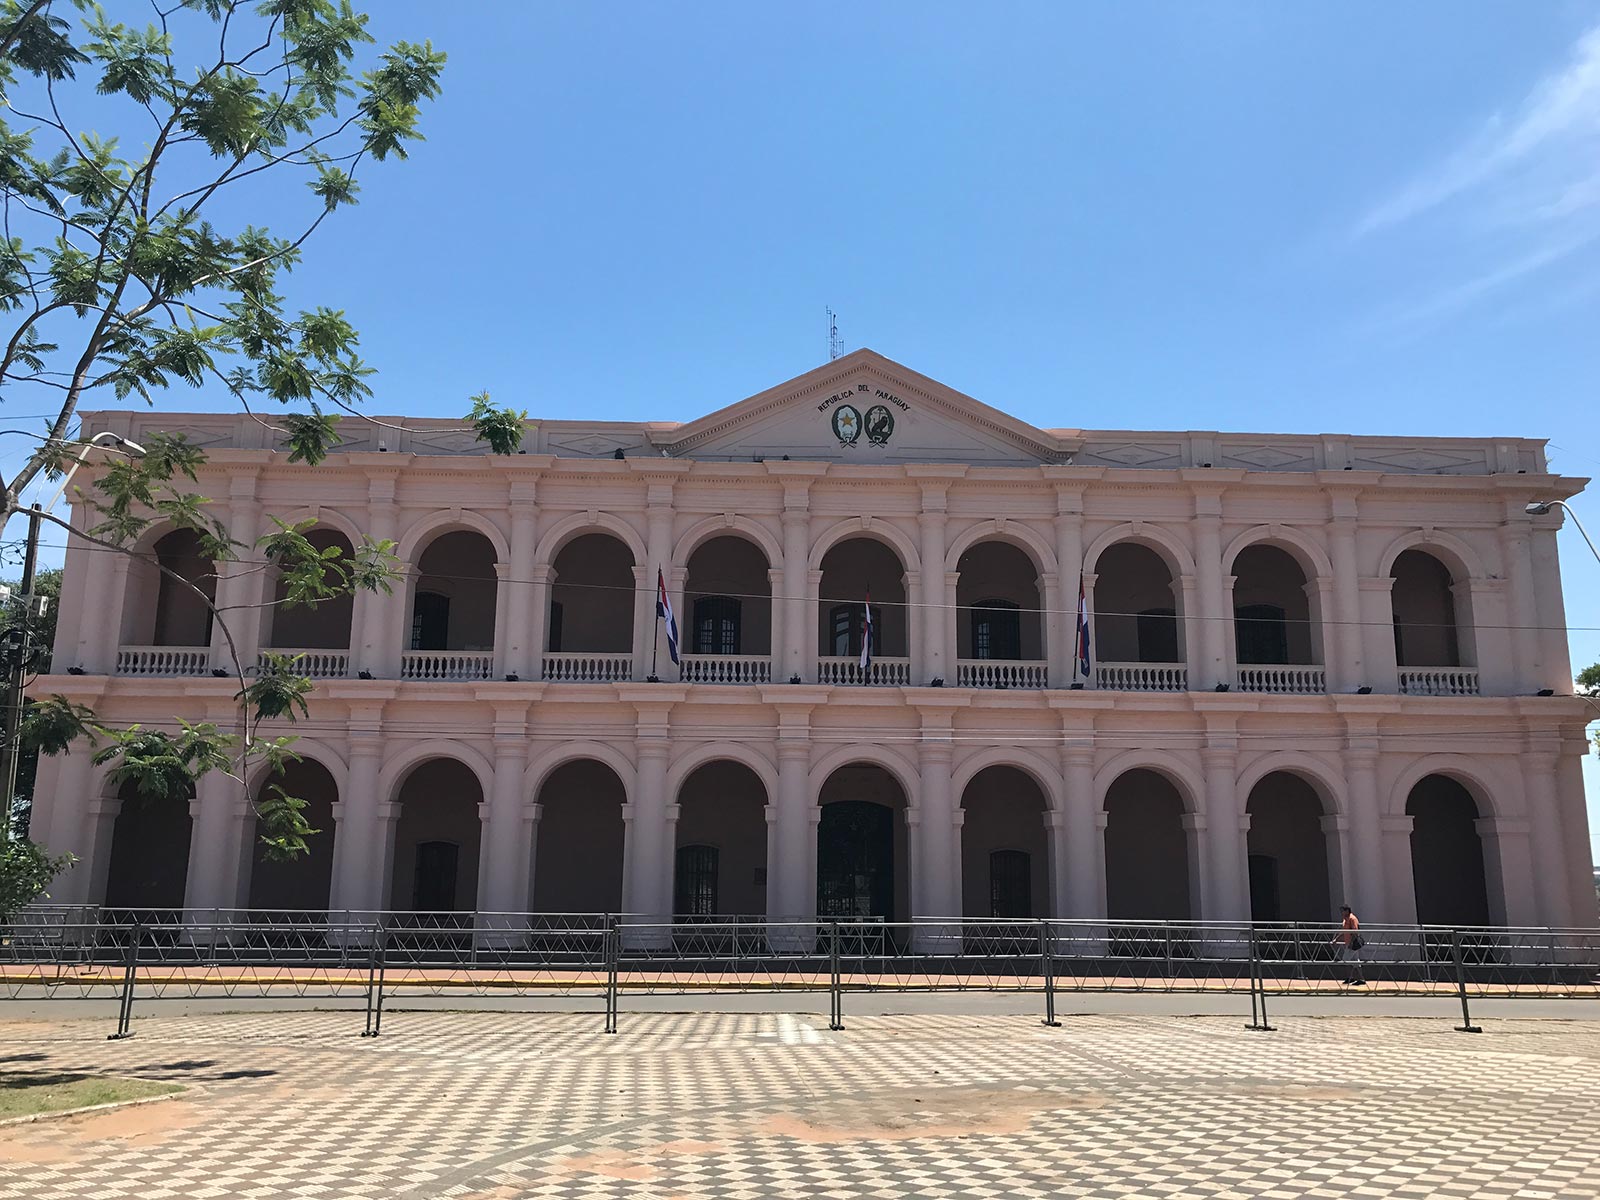 Government building in Paraguay. The biggest derby in the world